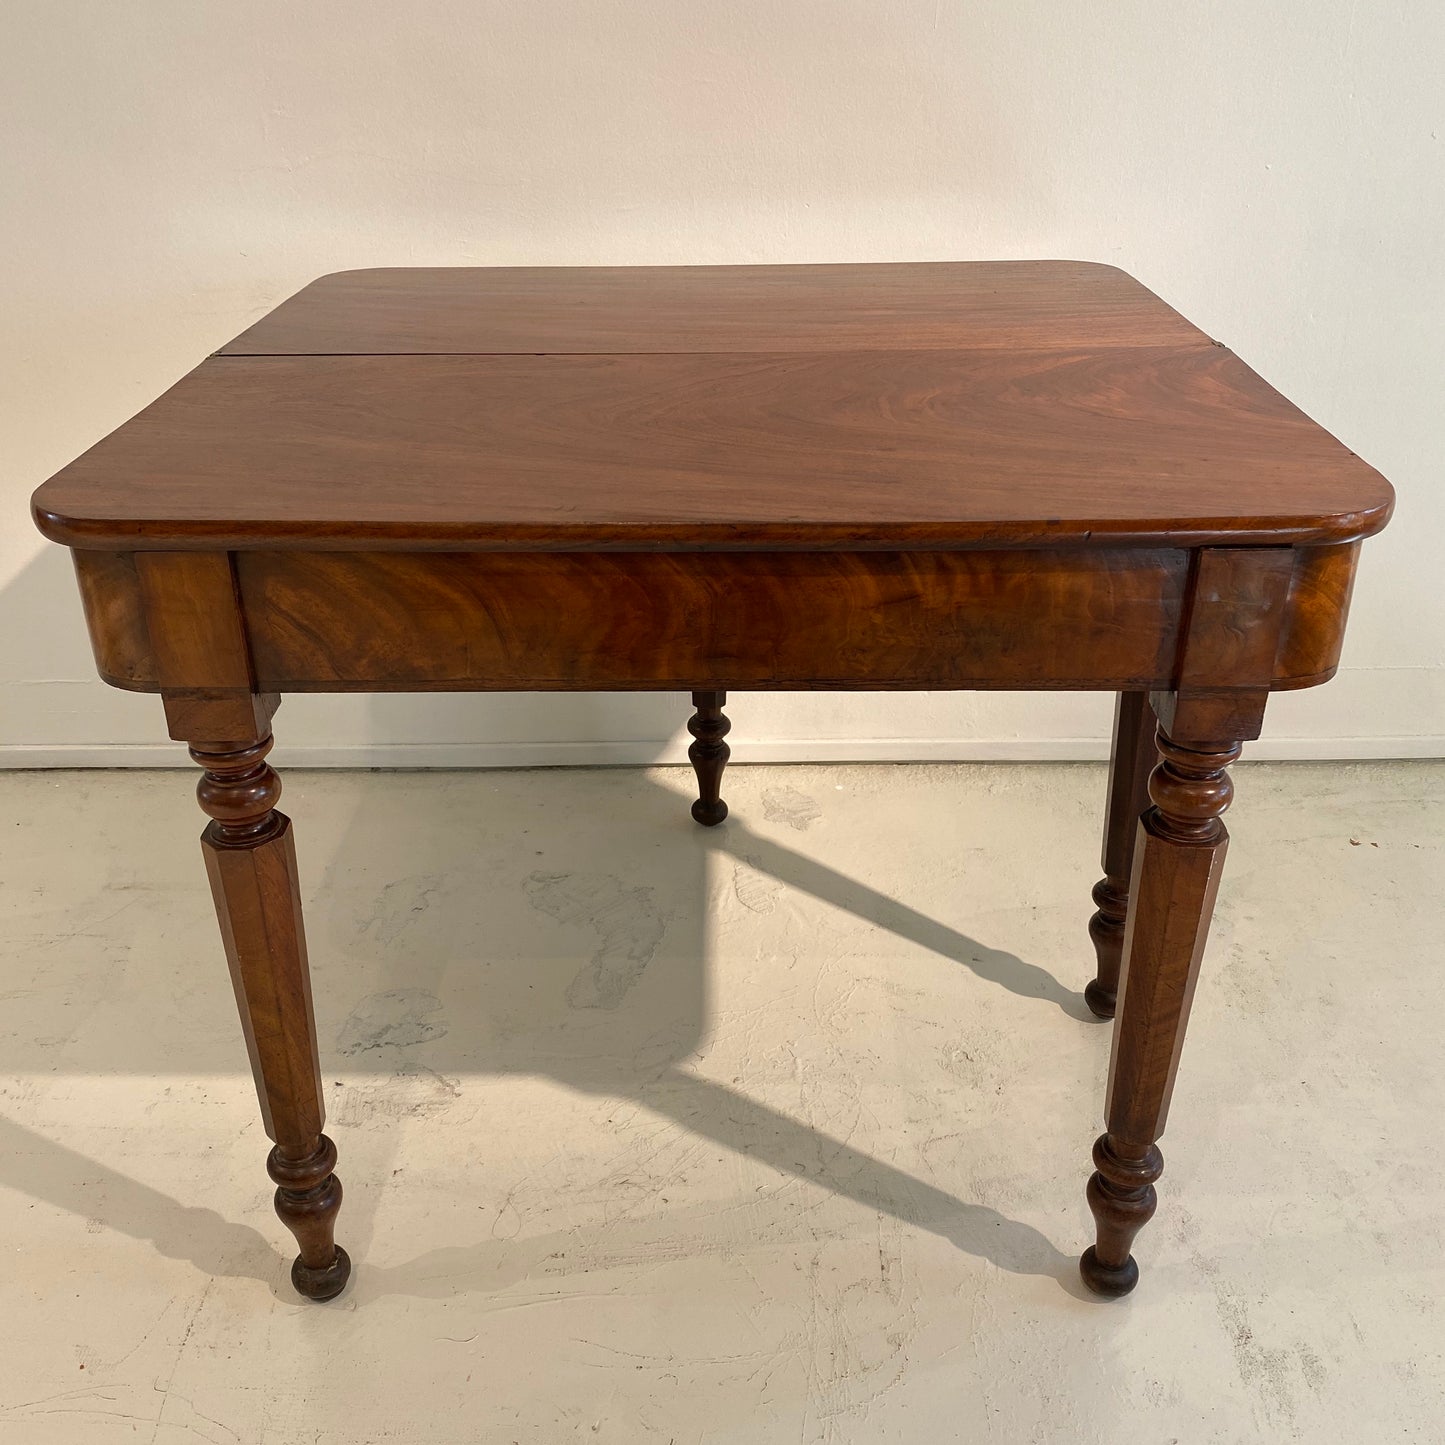 Victorian period Foldable Occasional Vintage Table